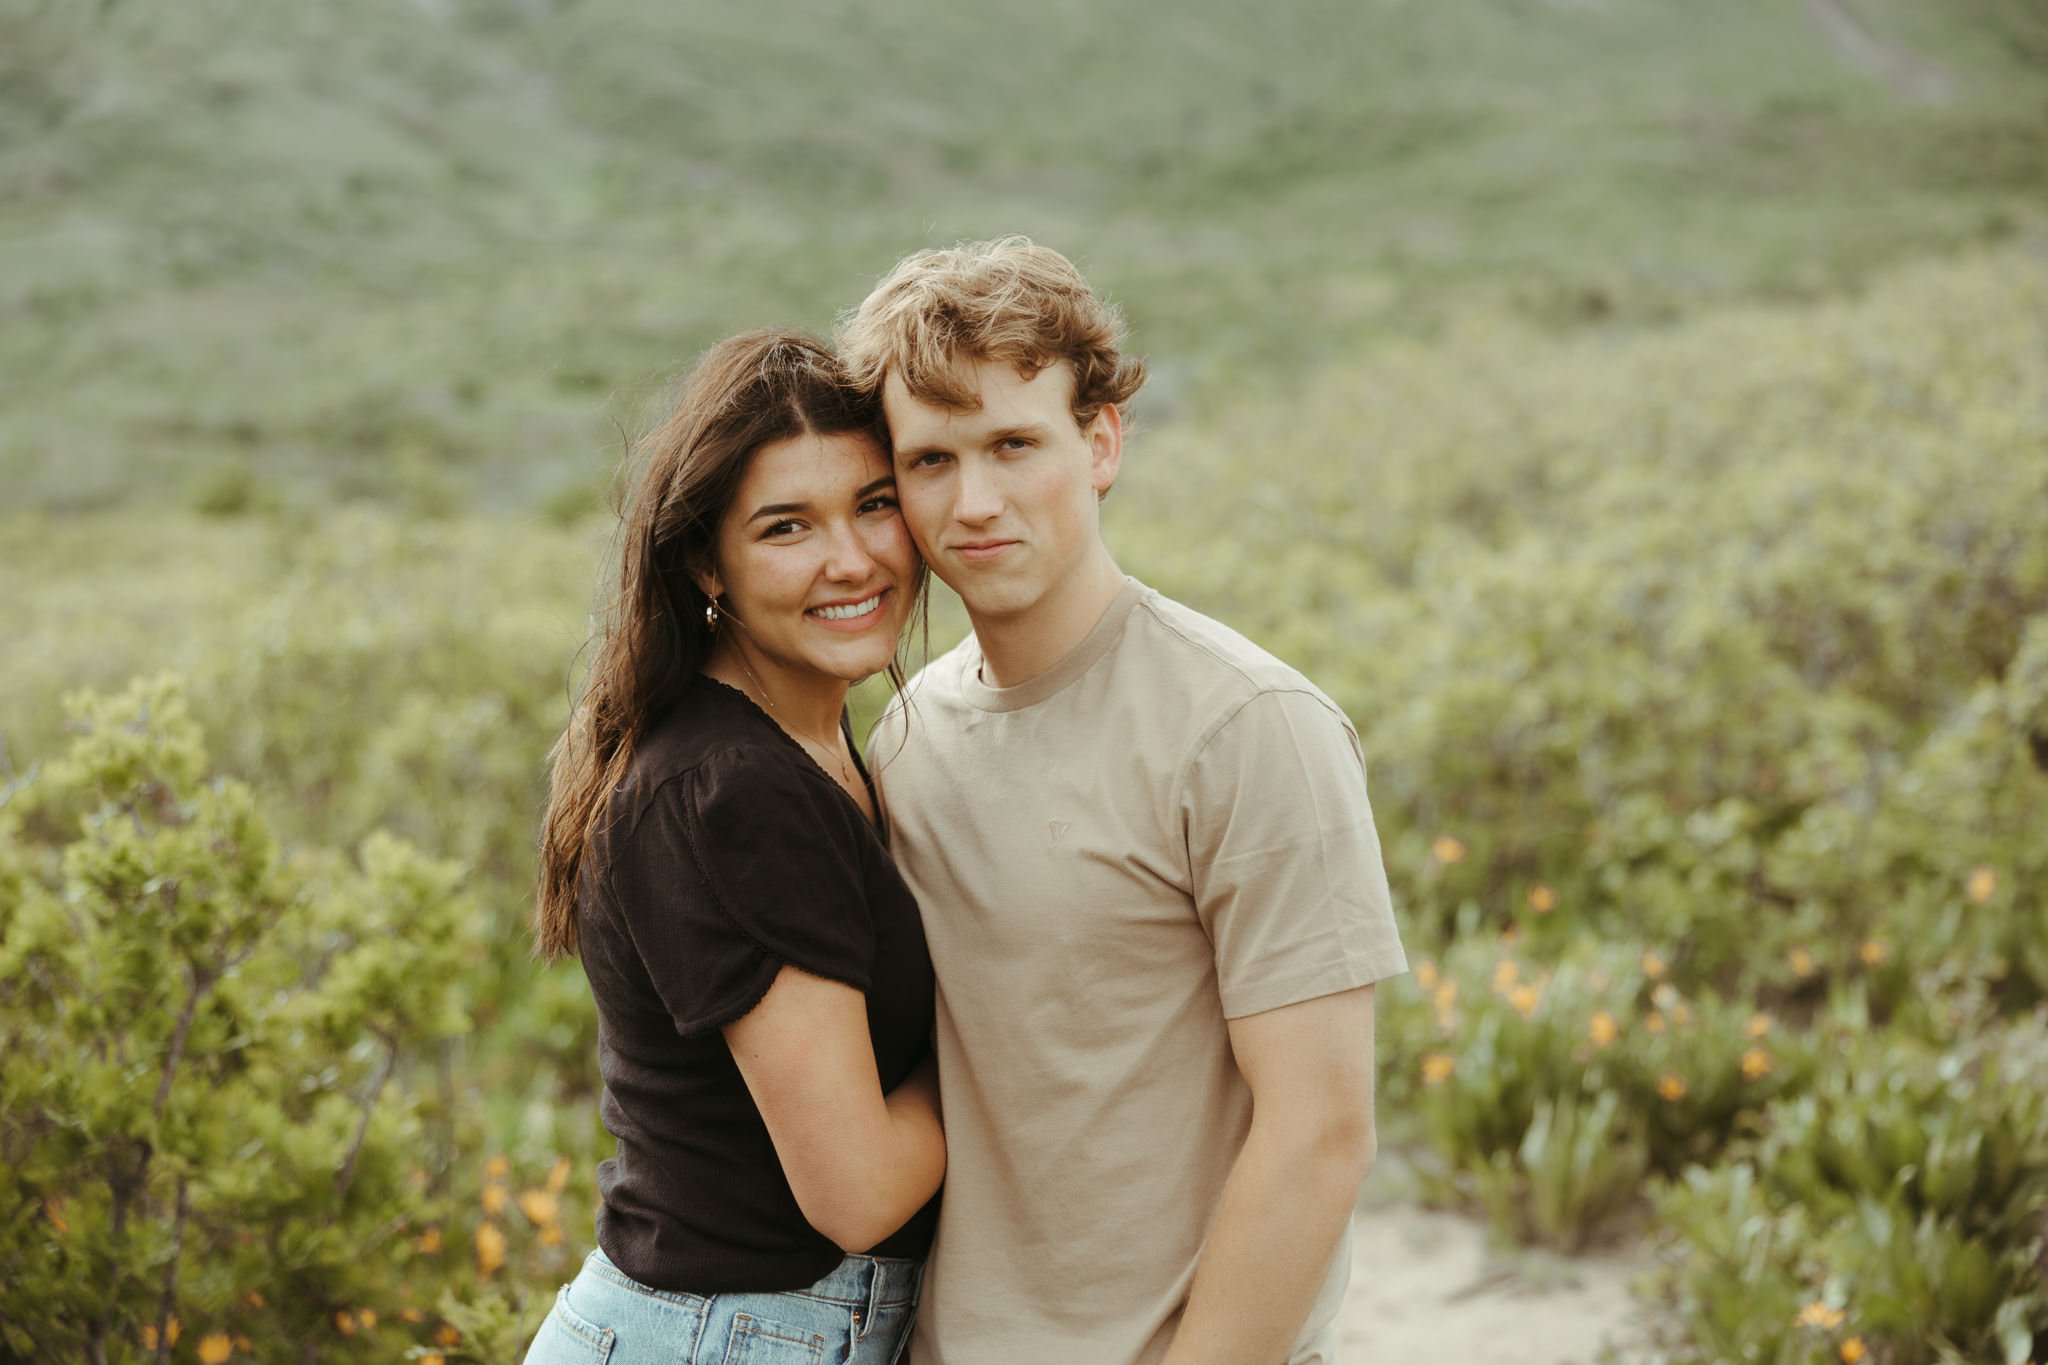 Spring-Provo-Canyon-Wildflowers-Engagement-Session-31